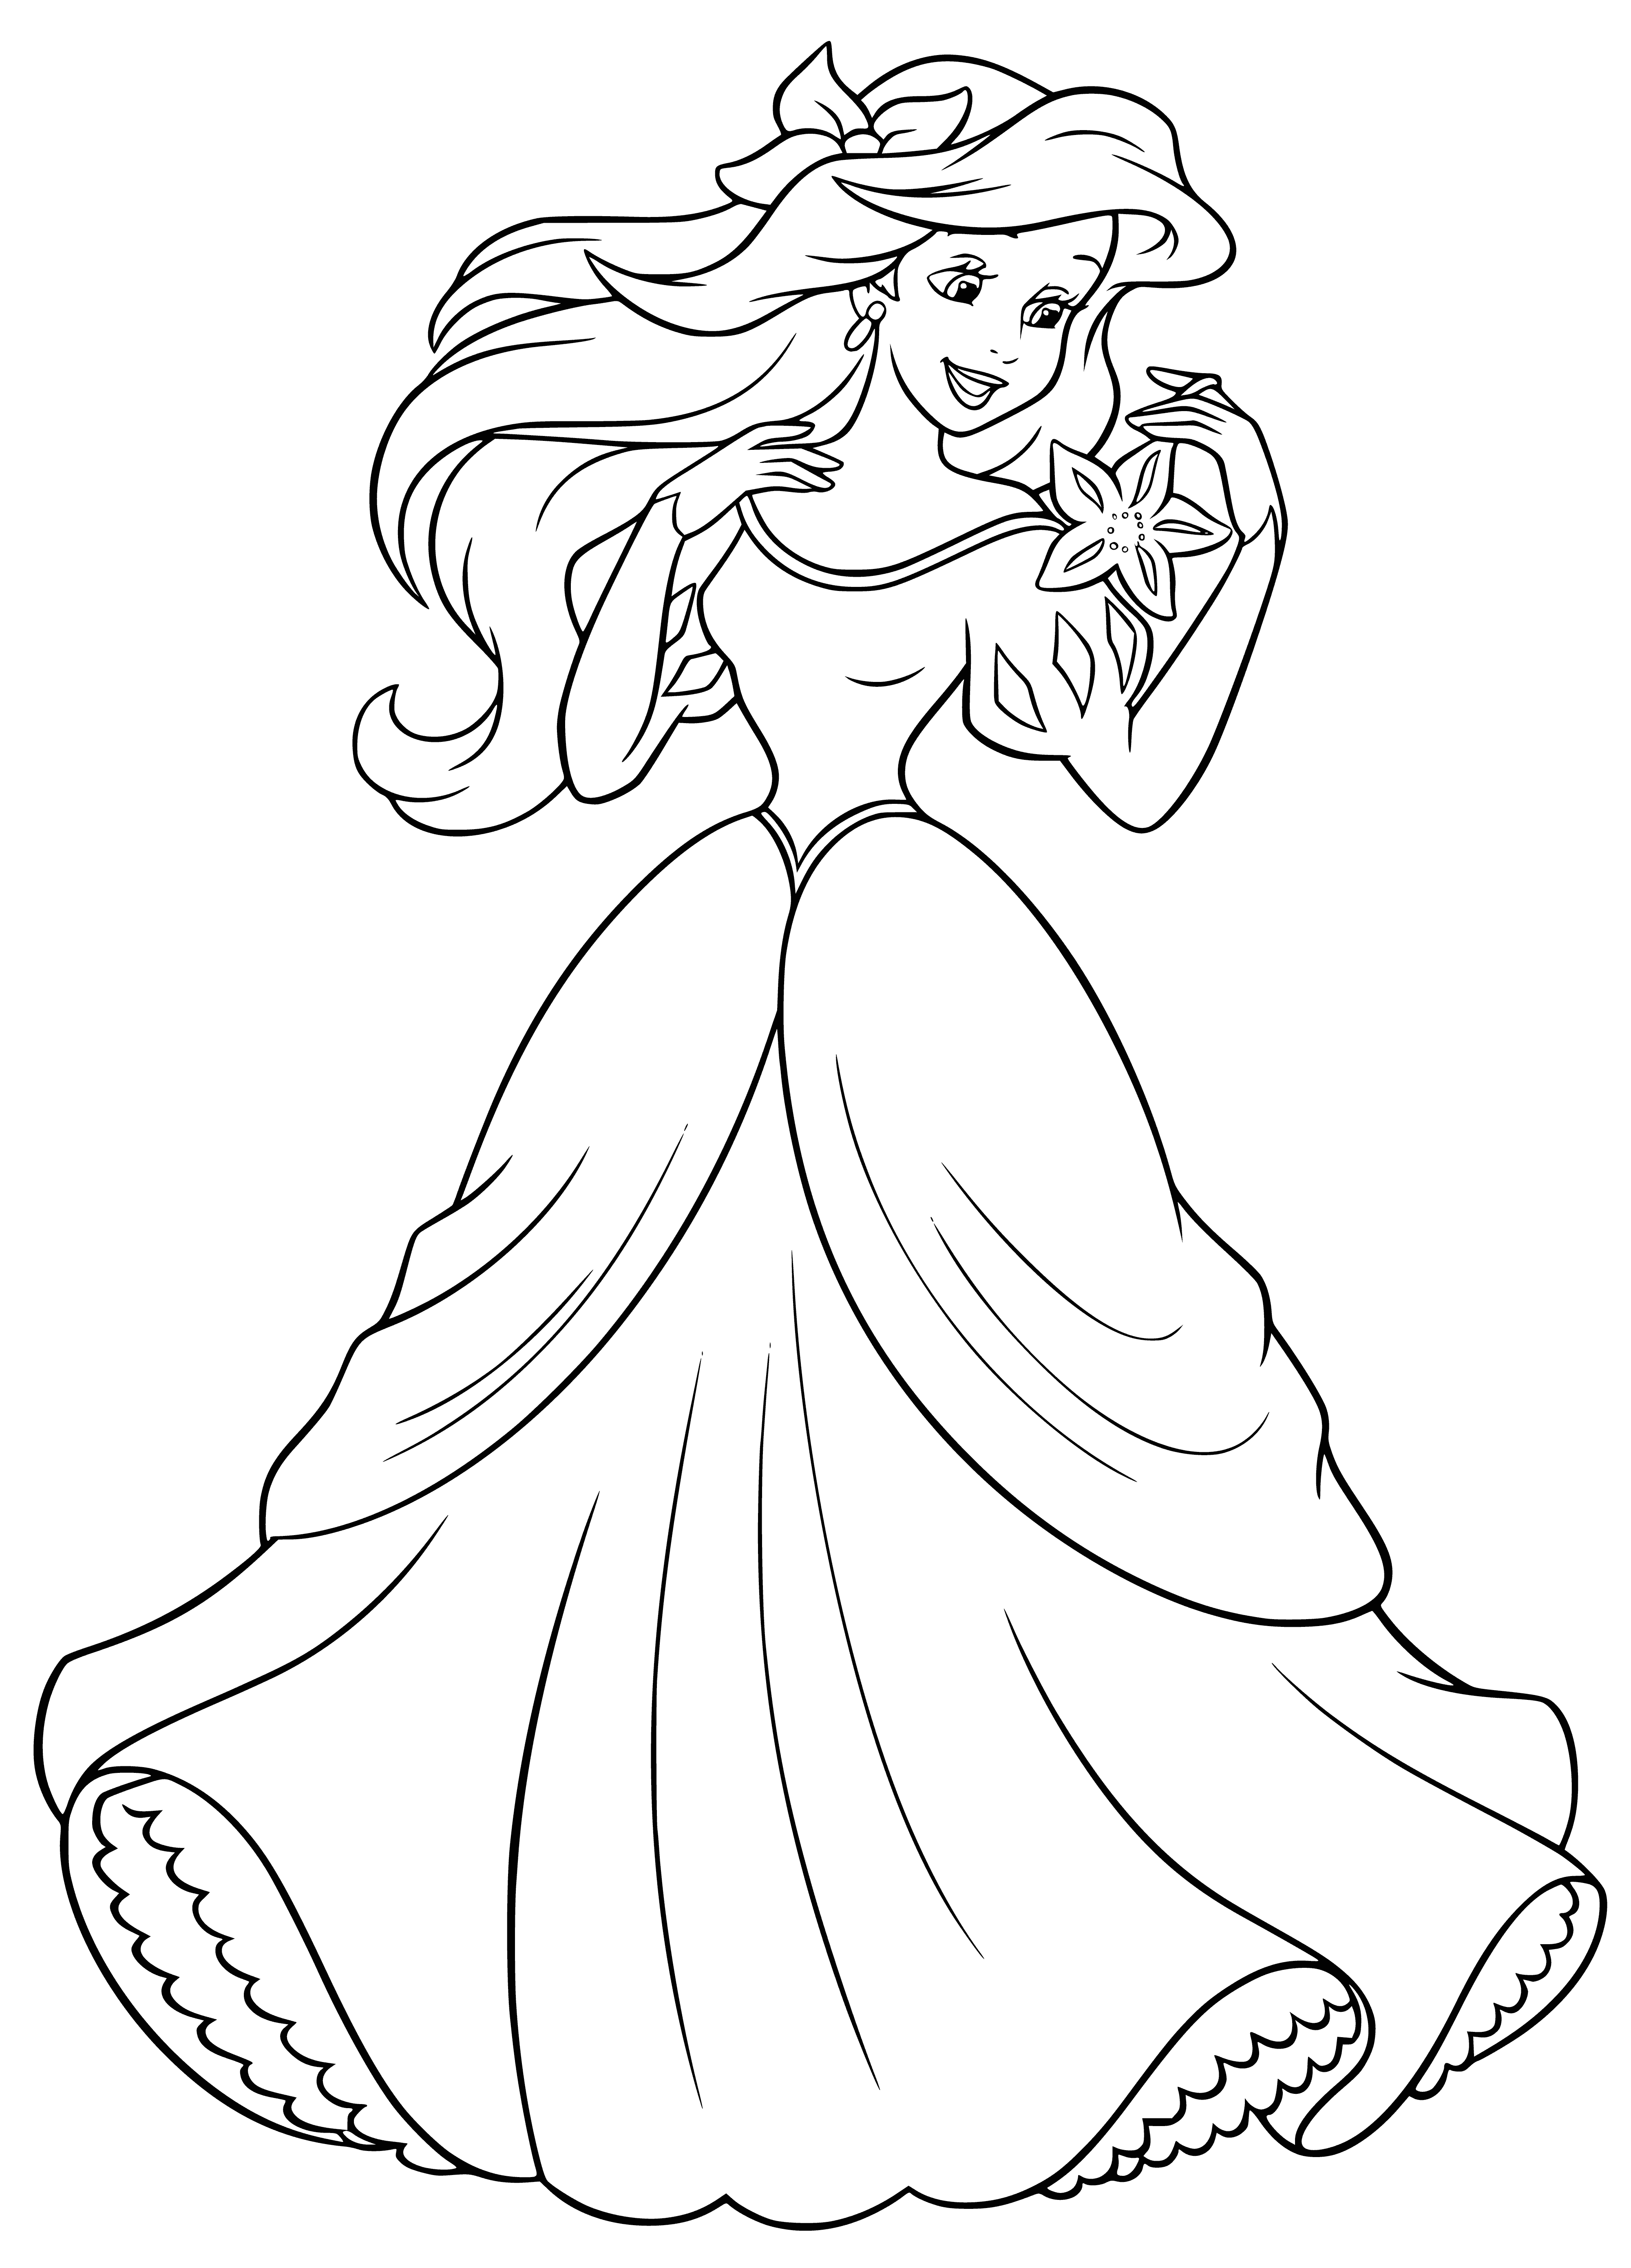 Ariel in a dress coloring page